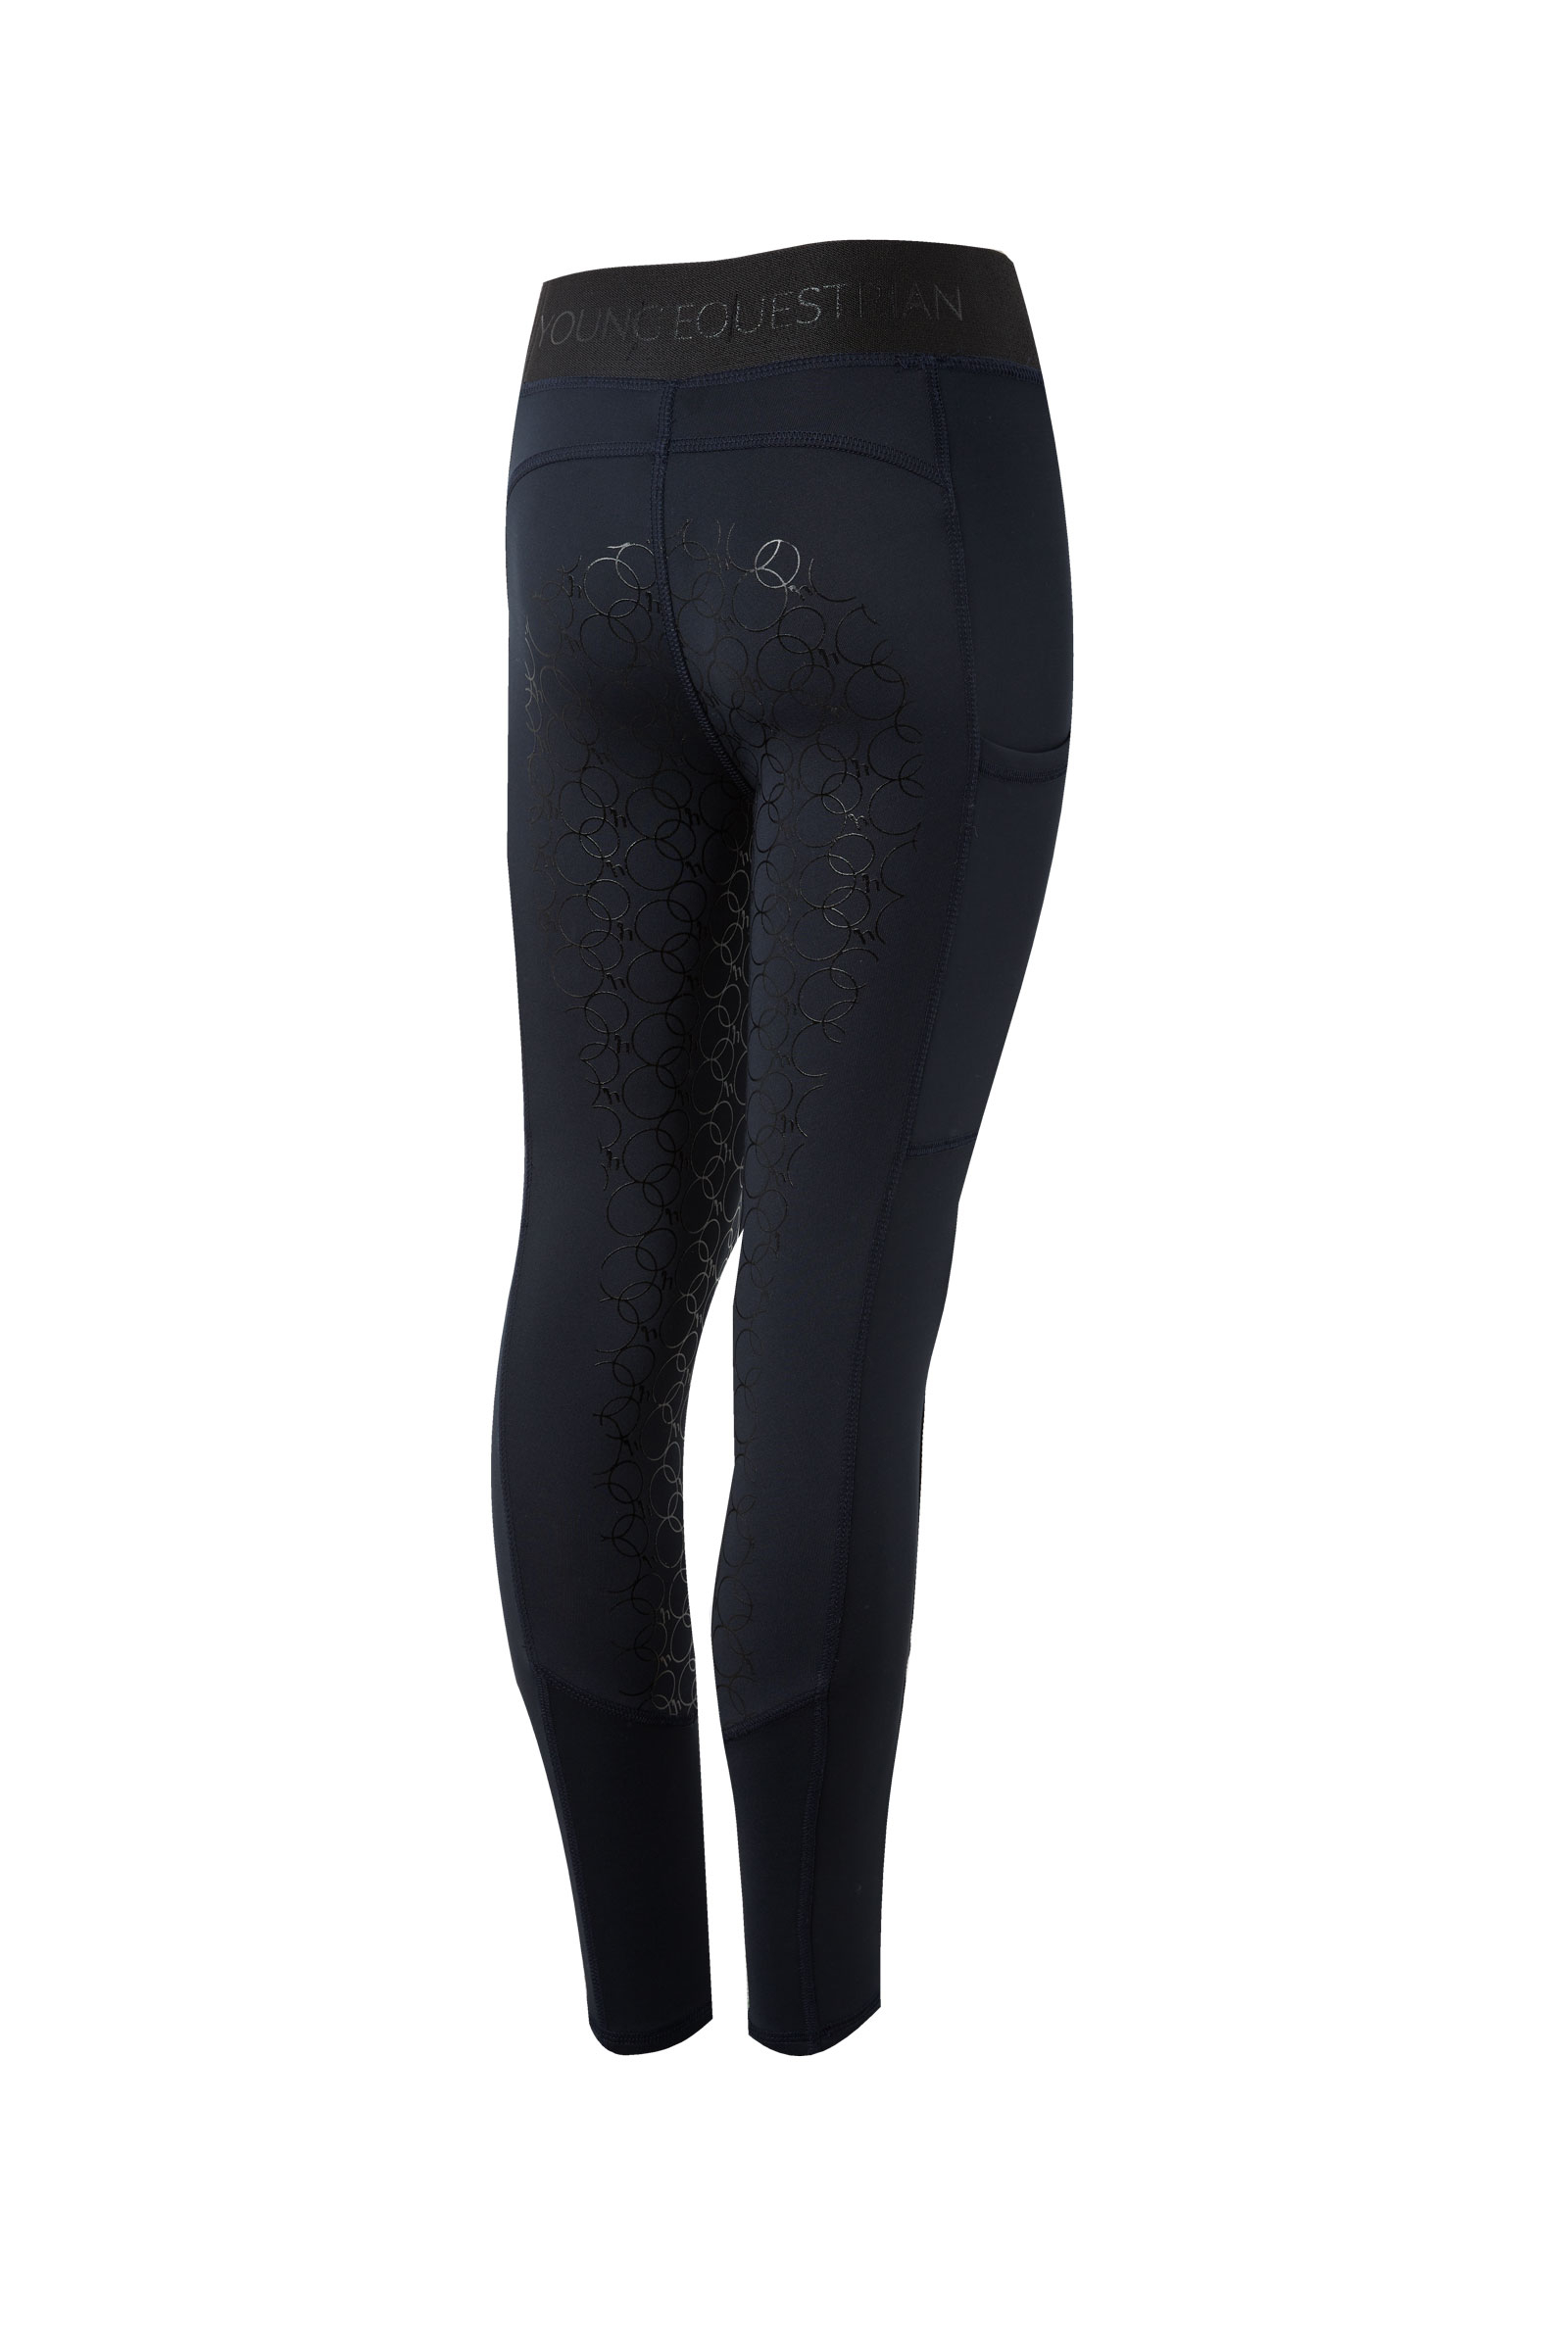 Buy Horze Leighton Teens Silicone Full Grip Riding Tights with